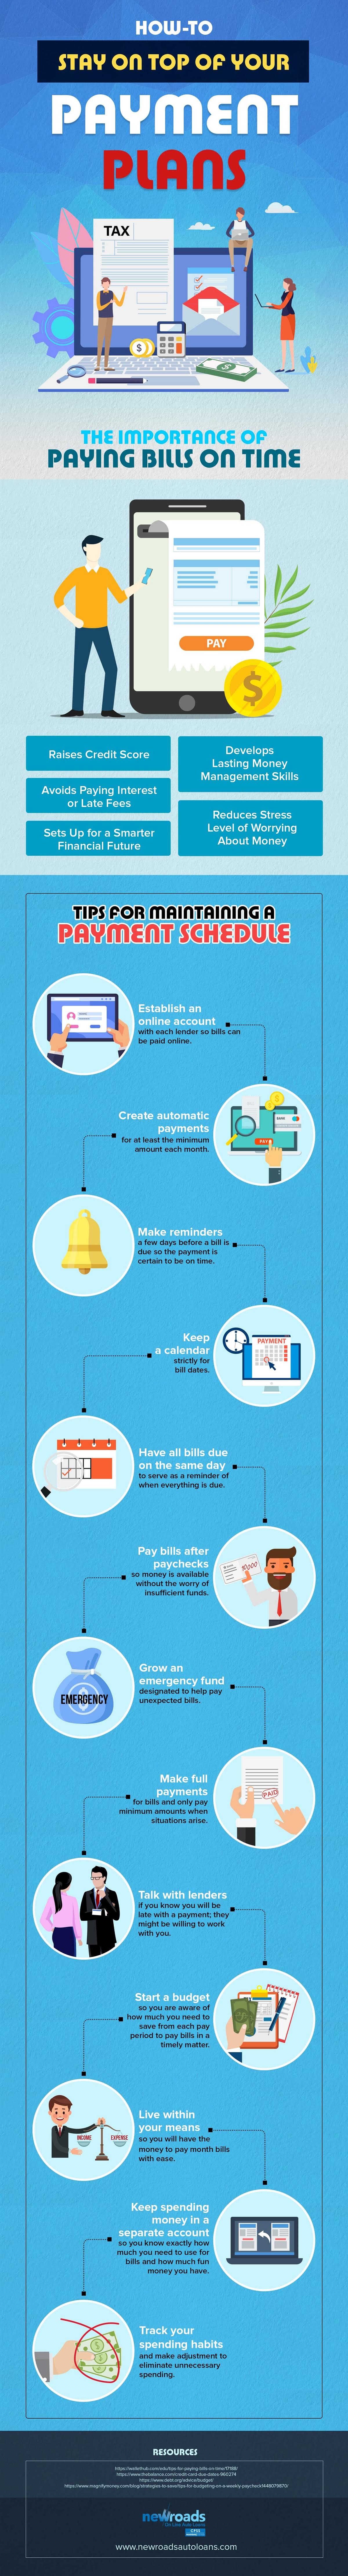 How to Stay on Top of Your Payment Plans #infographic